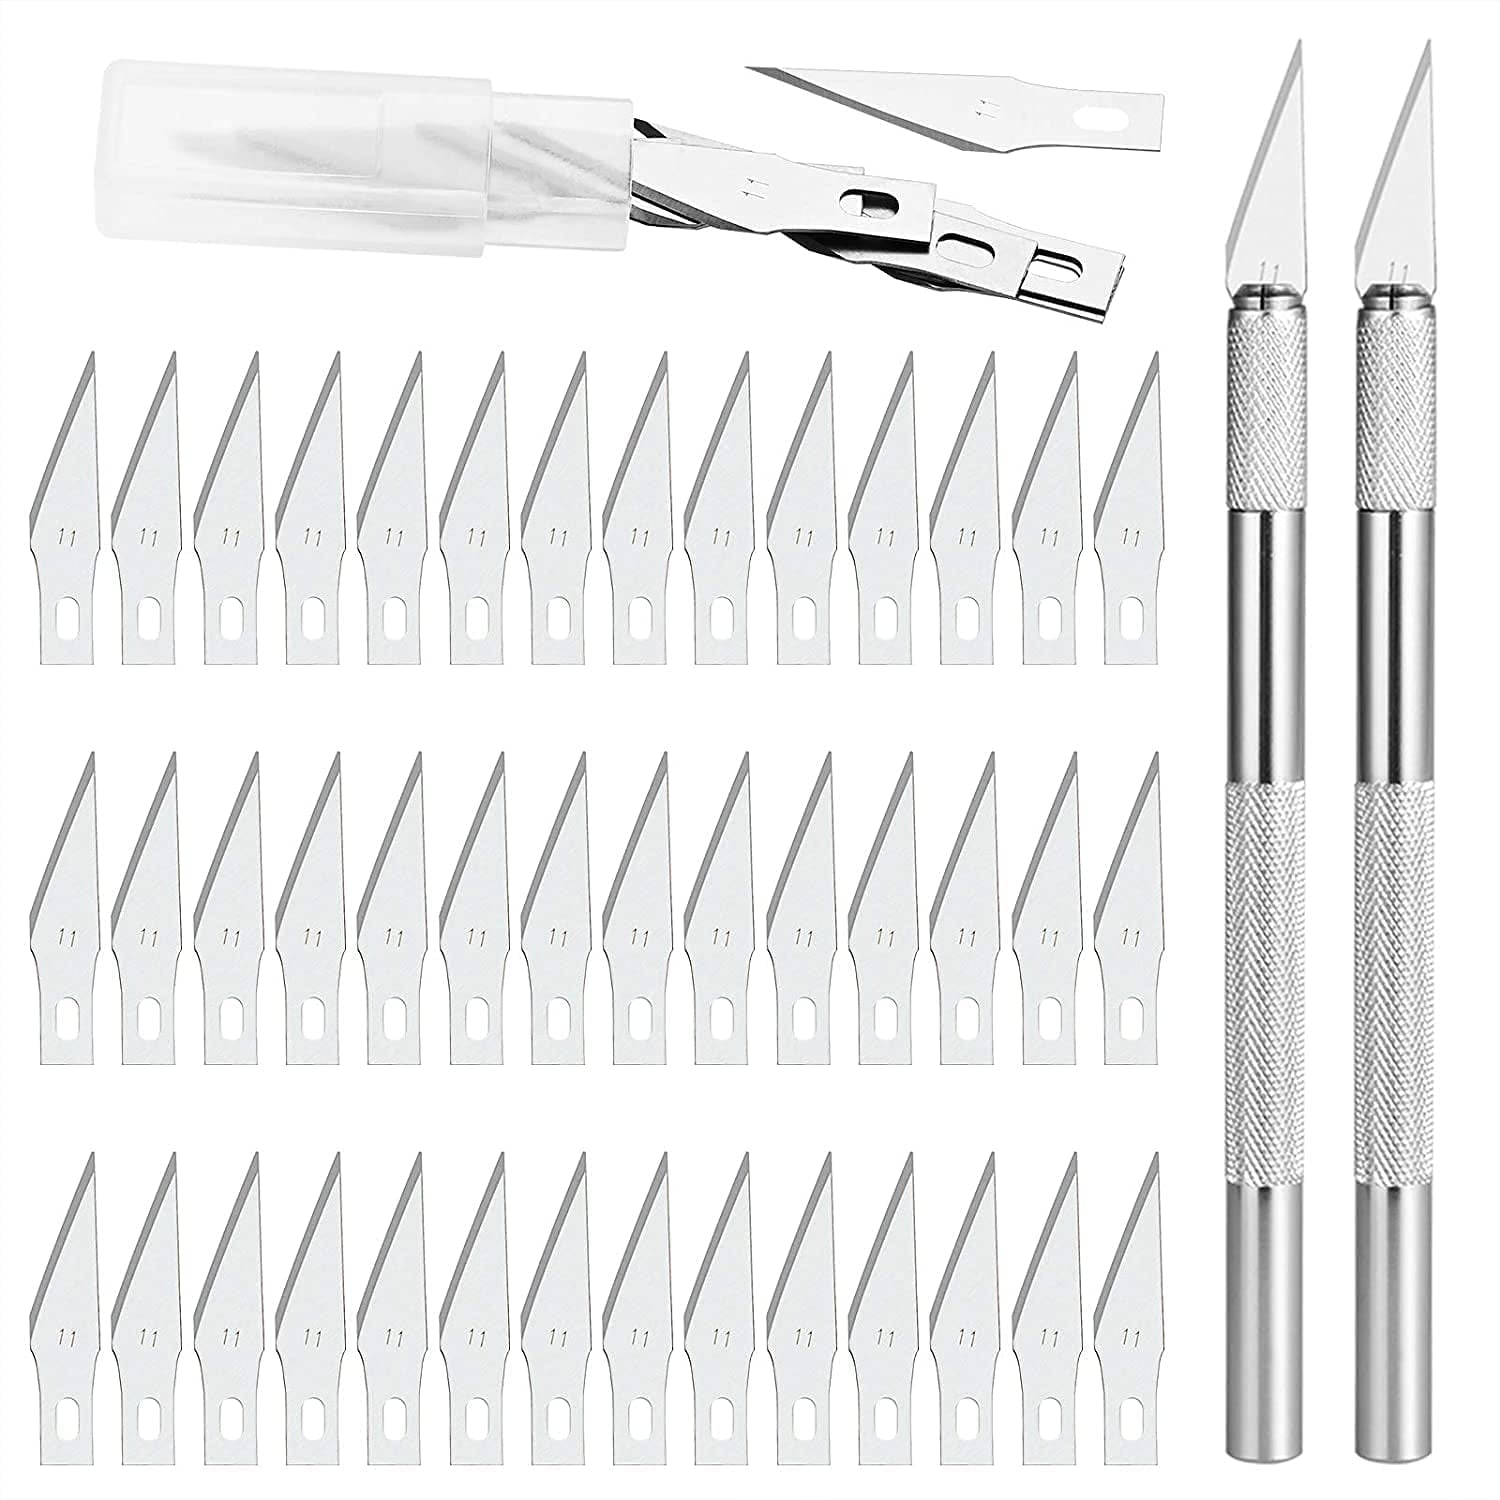 VCT 56pc Precision Craft Knife Set Professional Razor Sharp Knives for Art,  Hobby, Scrap booking and Sculpture